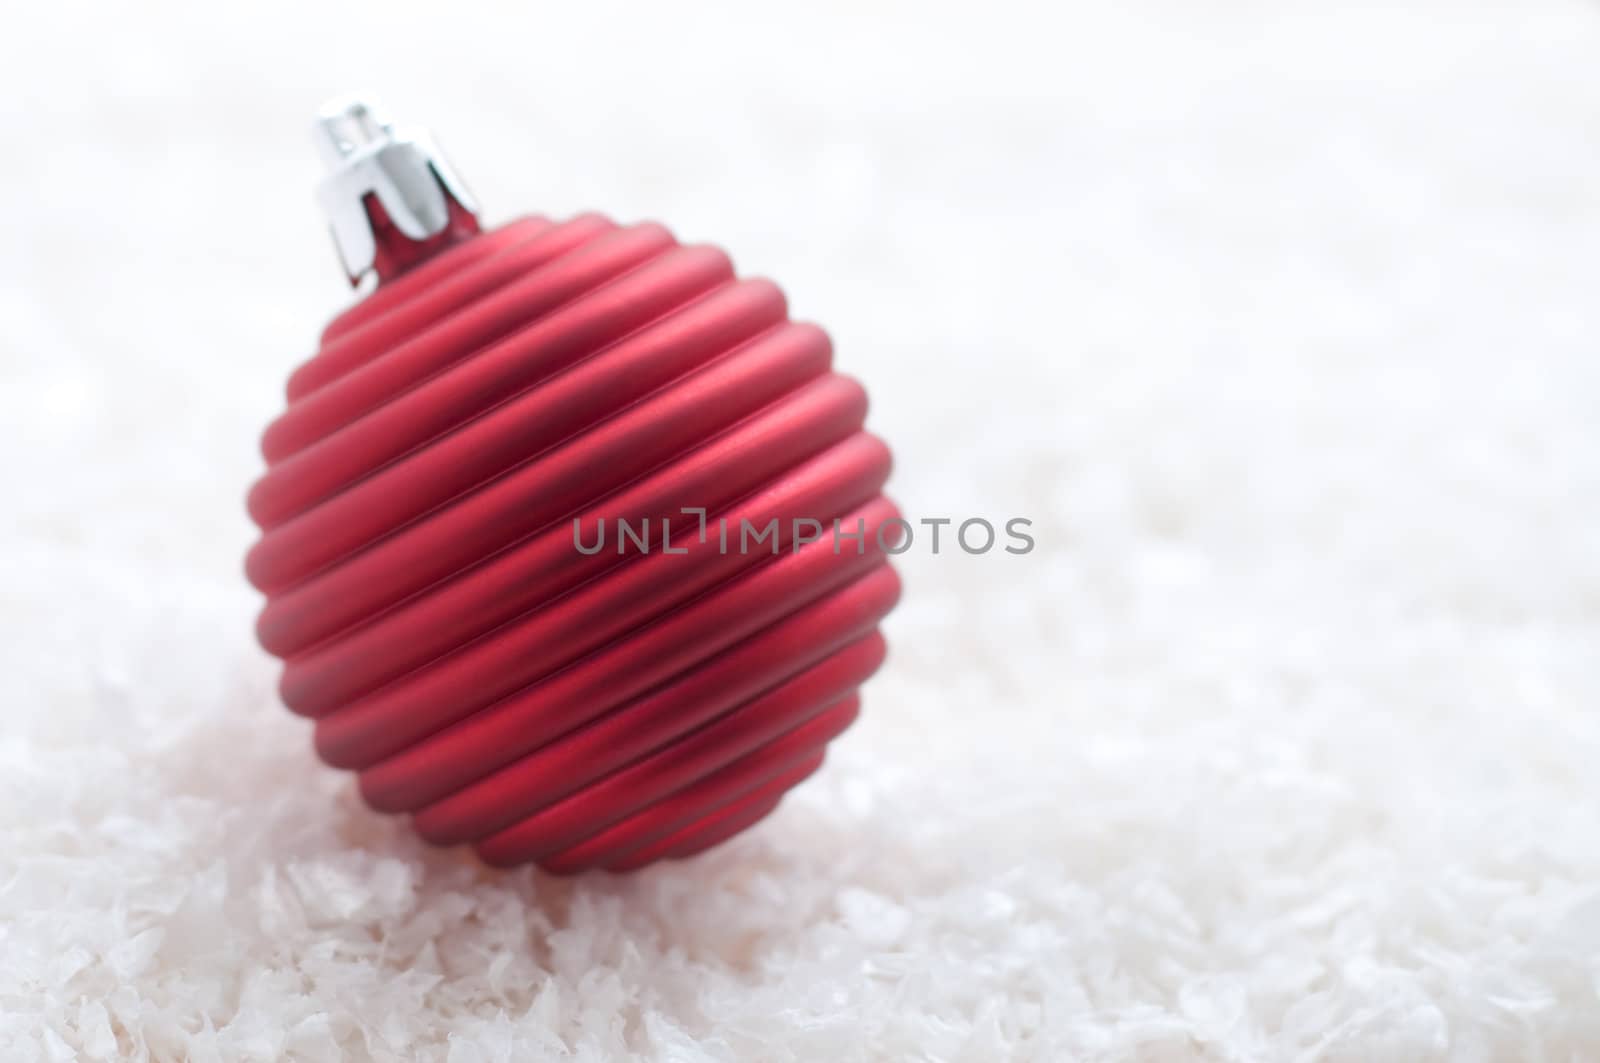 Red christmas ornament with copytext